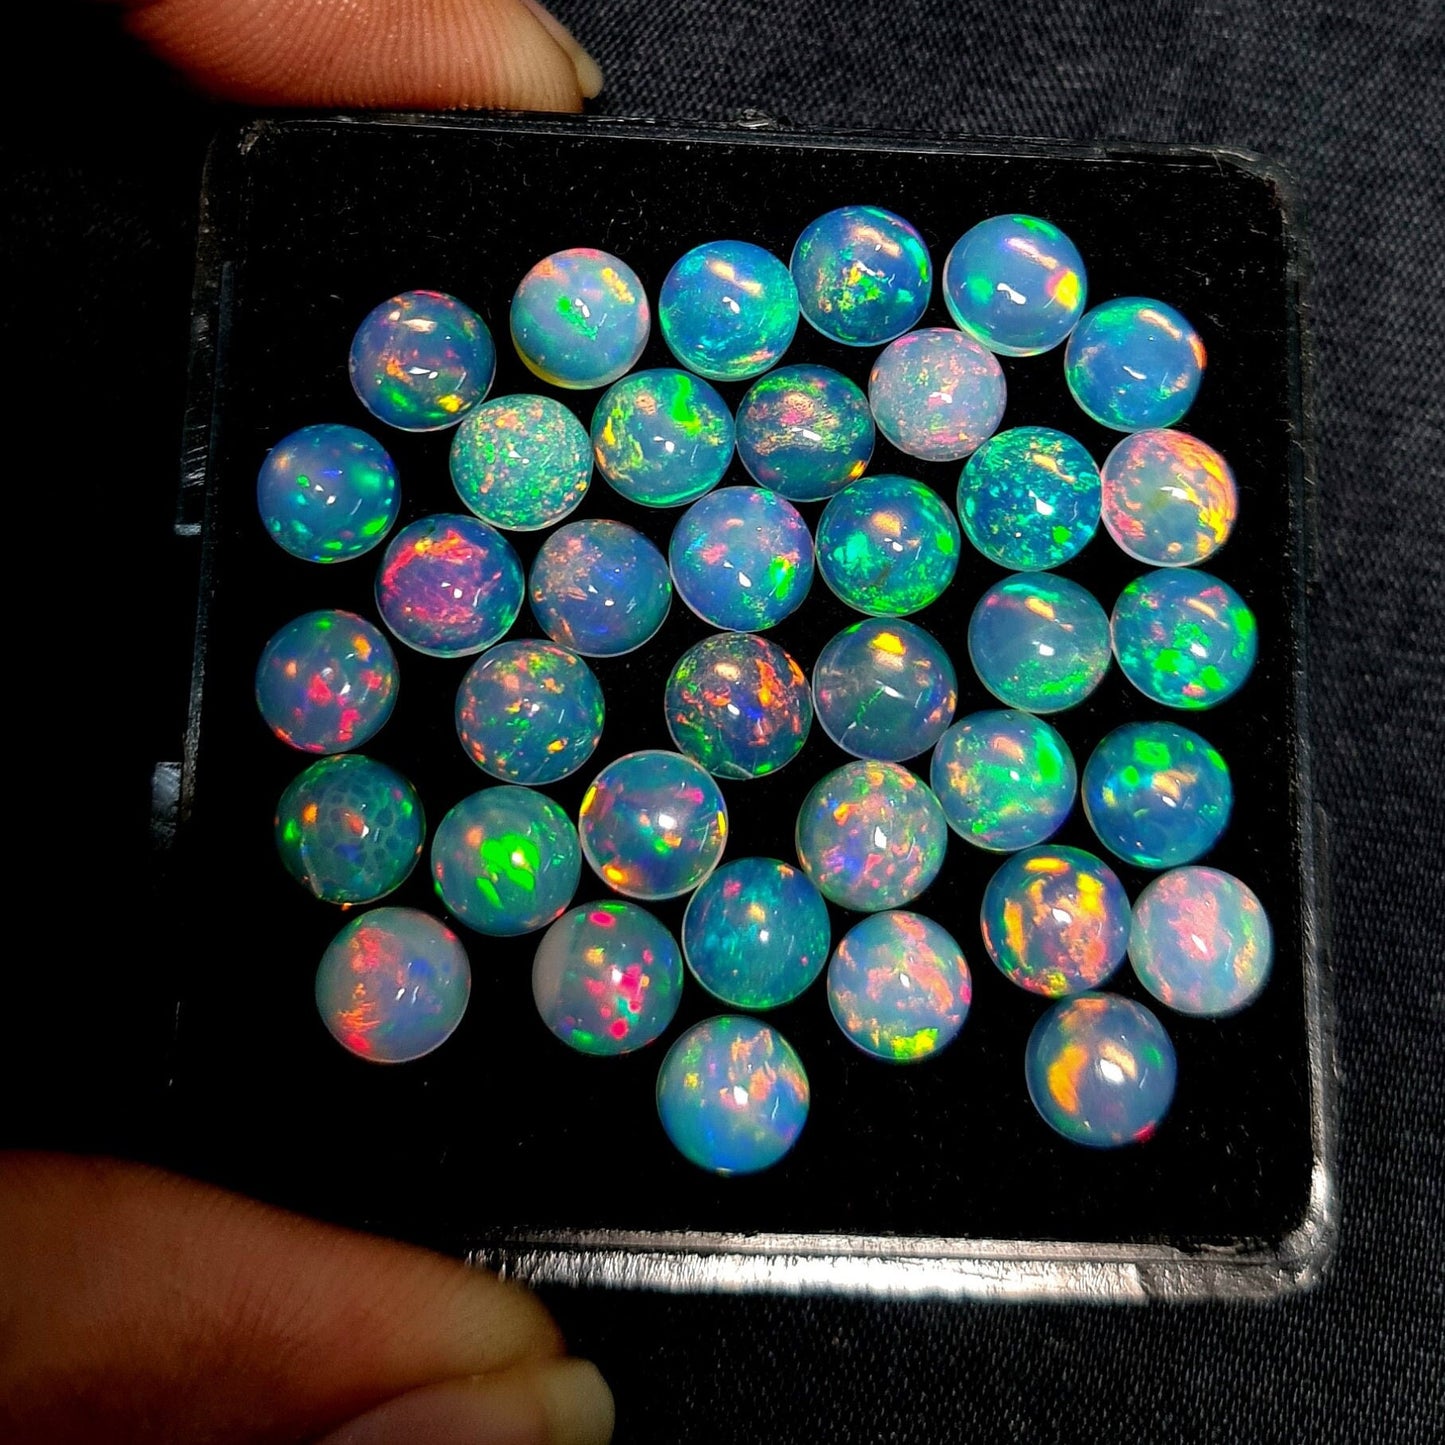 Natural Ethiopian Opal 6 mm Round Cabochon, Multi Fire Opal Gemstone, AAA Quality Opal Cabs Lot For Jewelry Making. (Natural)